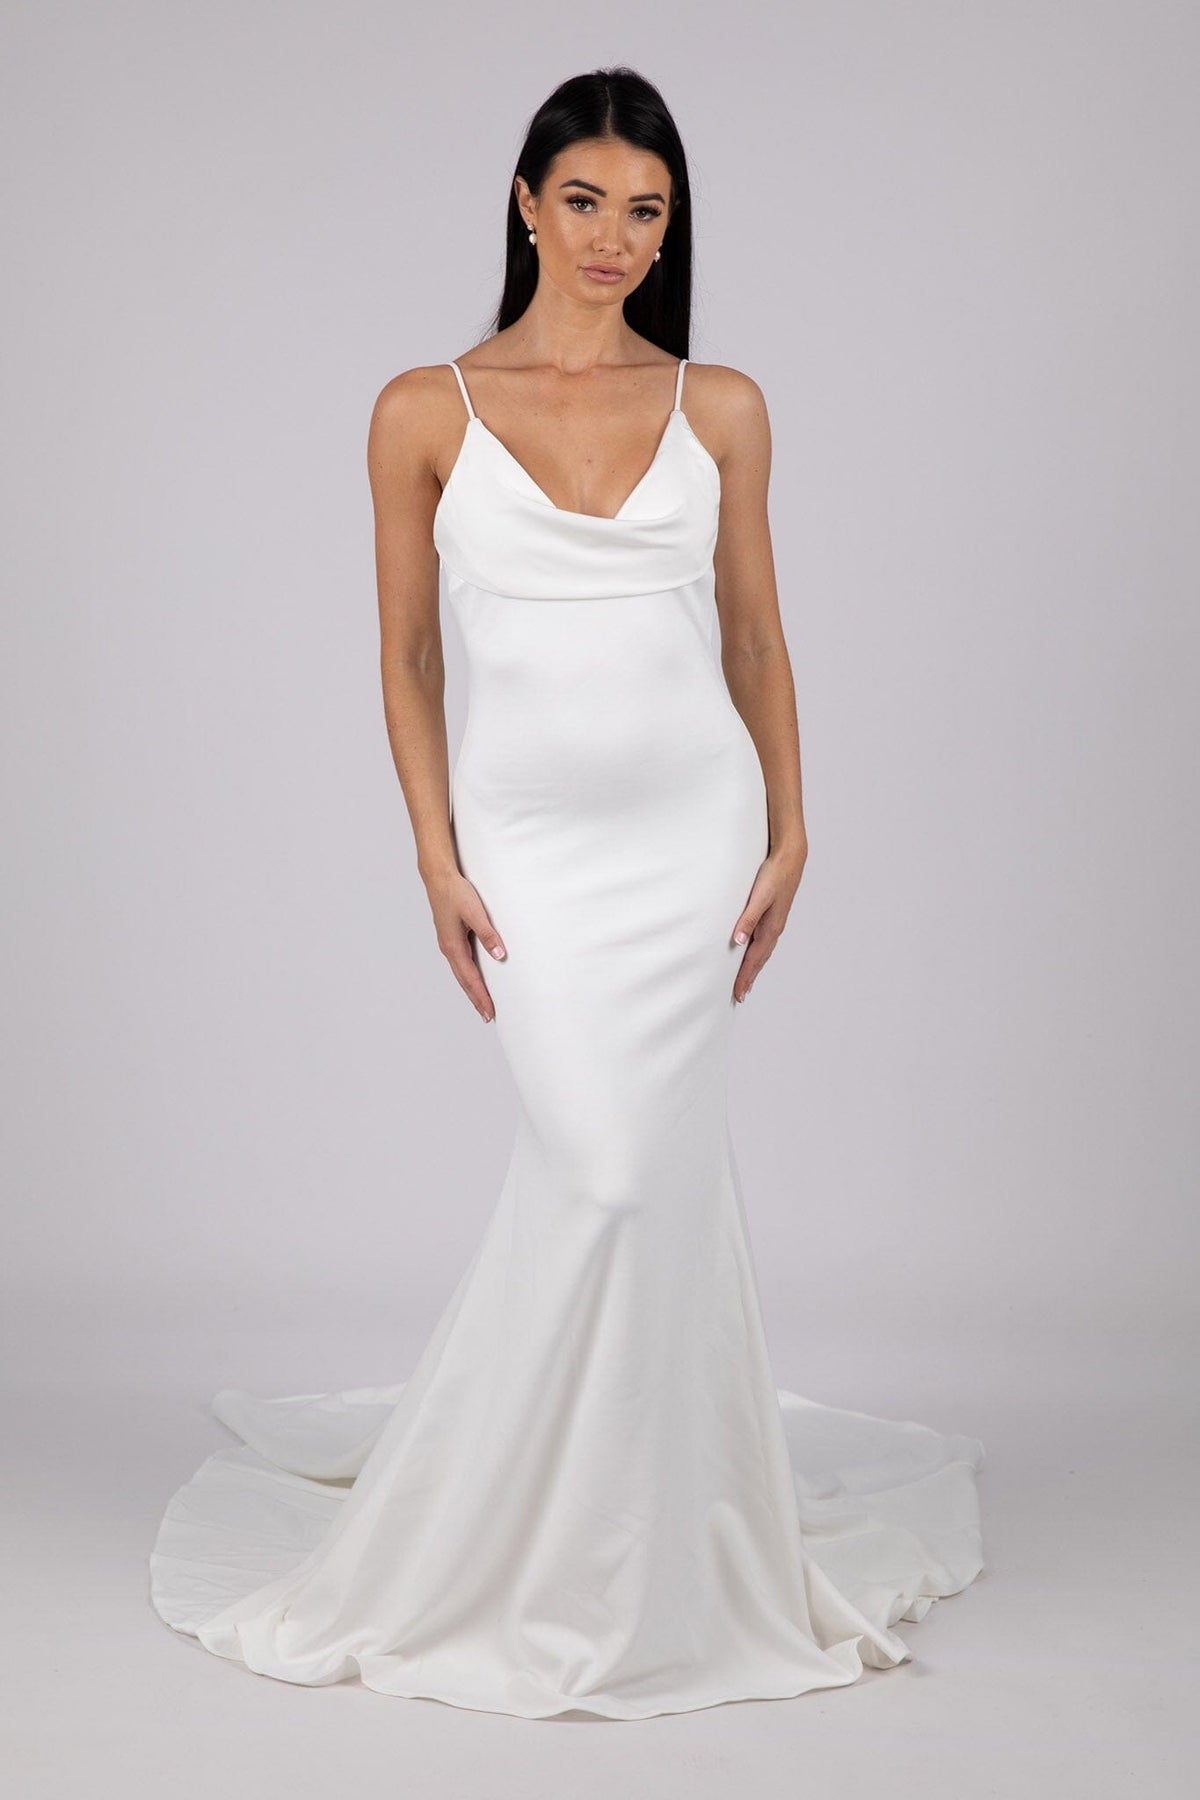 Ivory White Fitted Wedding Gown with Cowl Neckline, Thin Shoulder Straps and Backless with Cowl Back Detail